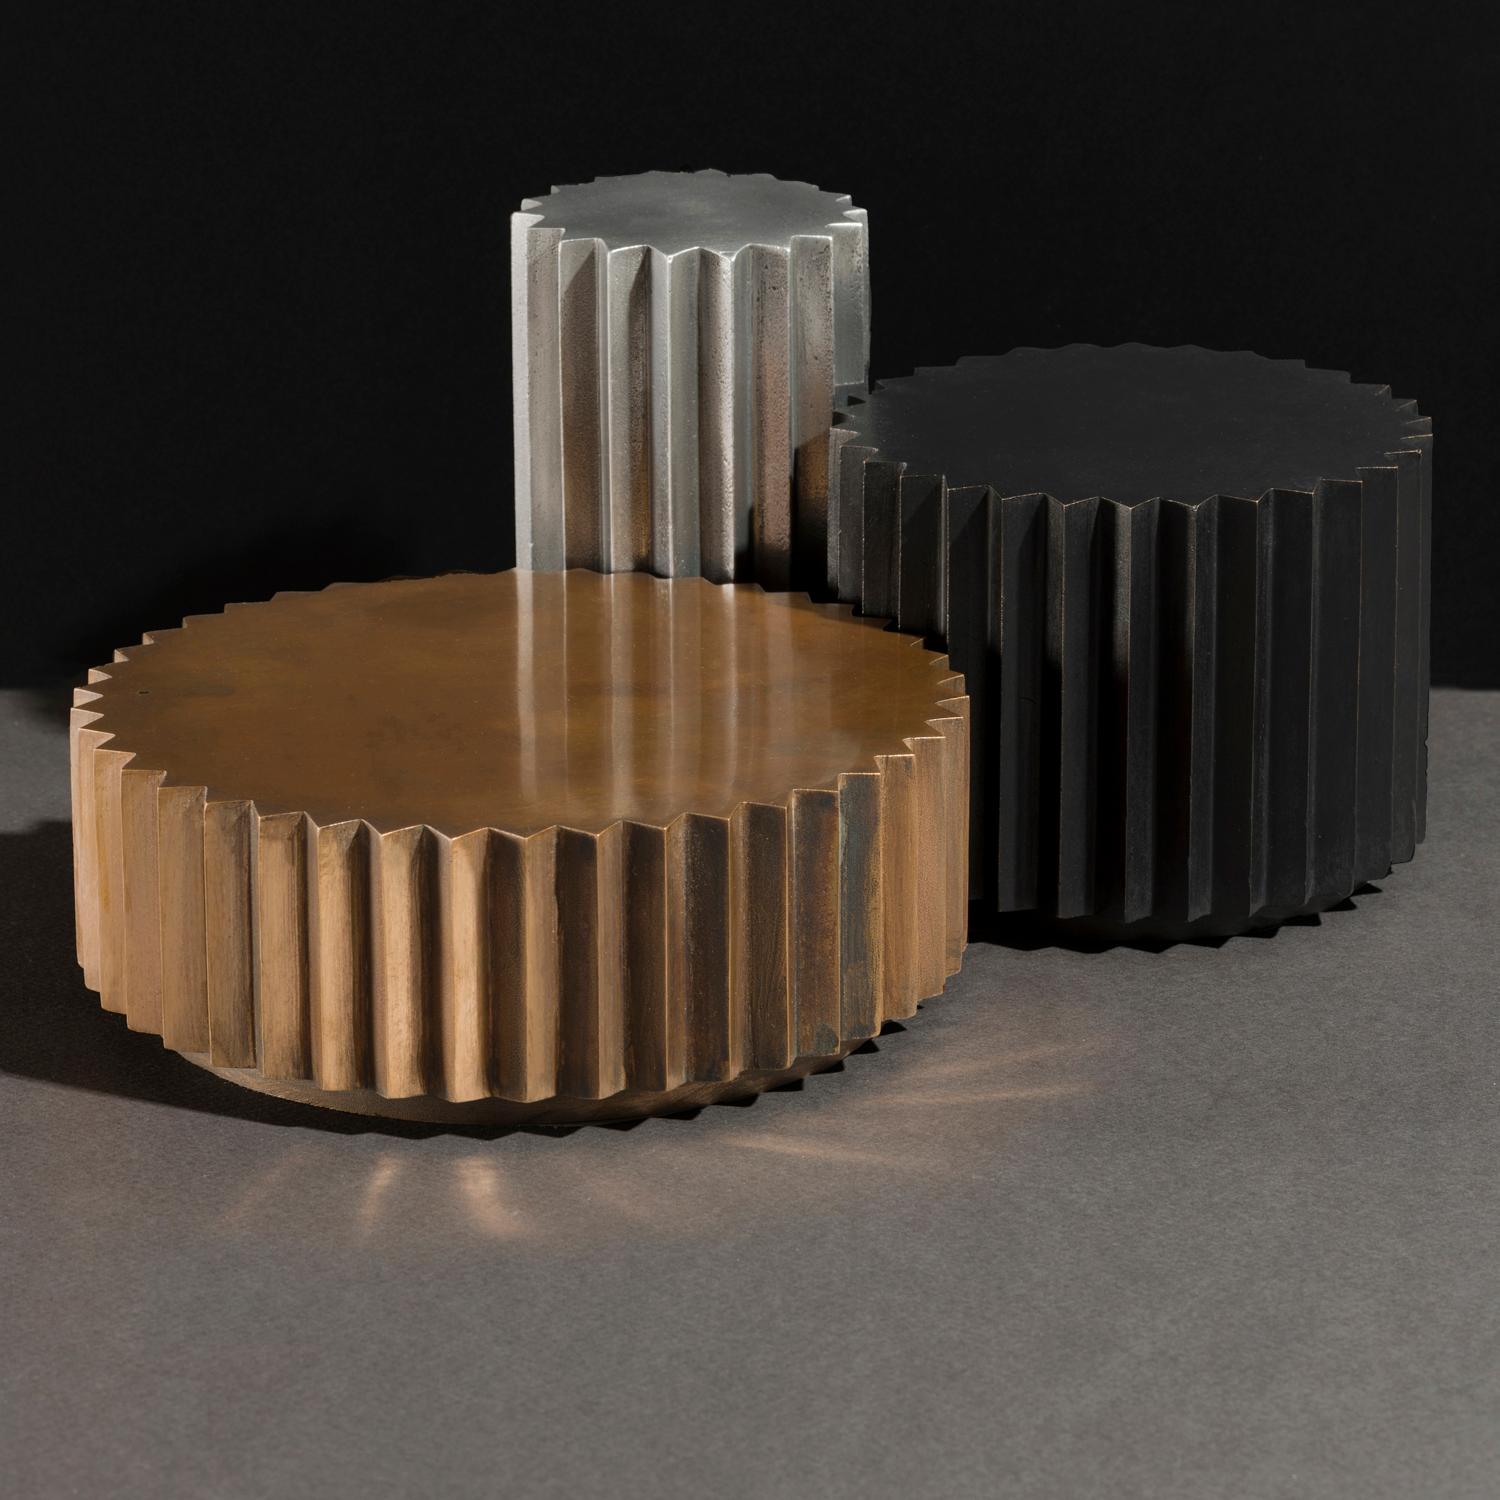 Set Of 3 Doris Tables by Fred and Juul
Dimensions: Low Coffee Table: Ø 84 x H 30 cm.
Coffee Table: Ø 60 x H 42 cm.
Side Table: Ø 36 x H 60 cm.
Materials: Bronze and aluminum.

Available in bronze and aluminum. Also available in different